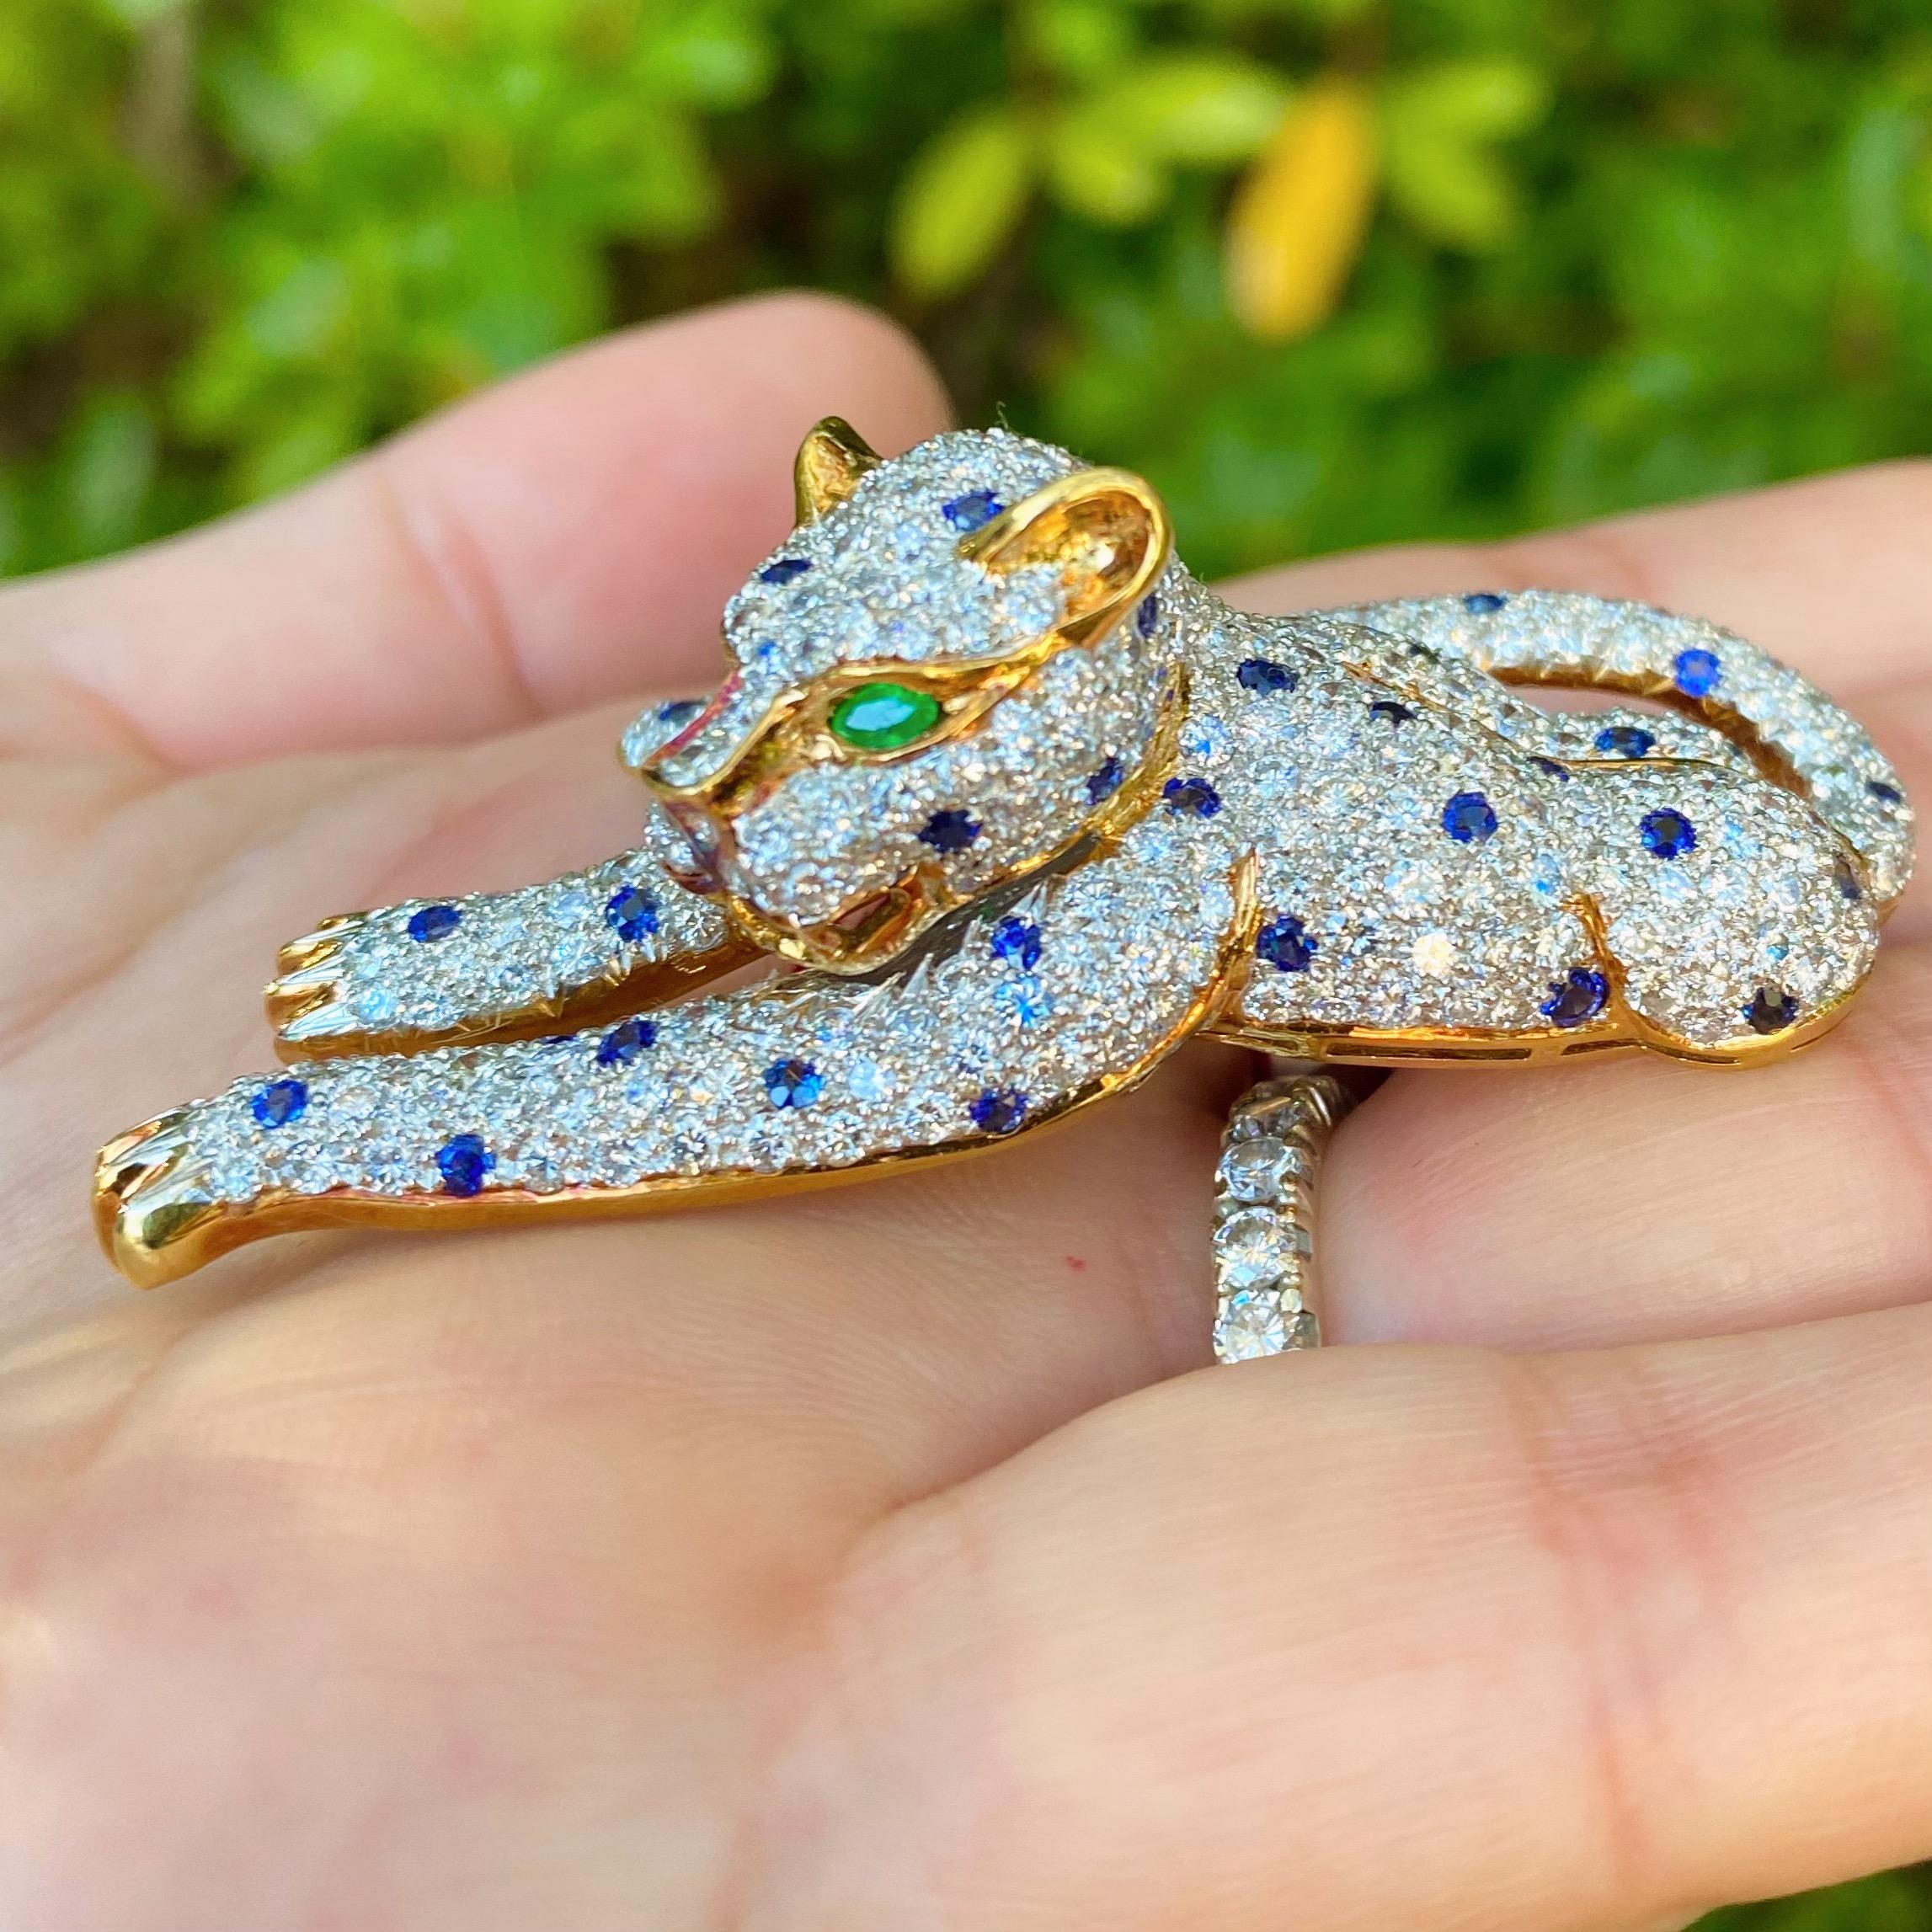 A truly extraordinary piece of jewelry designed for someone who appreciates the finer things. This 18 karat gold leopard brooch features approximately 7.30 carats of fine white diamonds expertly set to create one incredible design. With blue